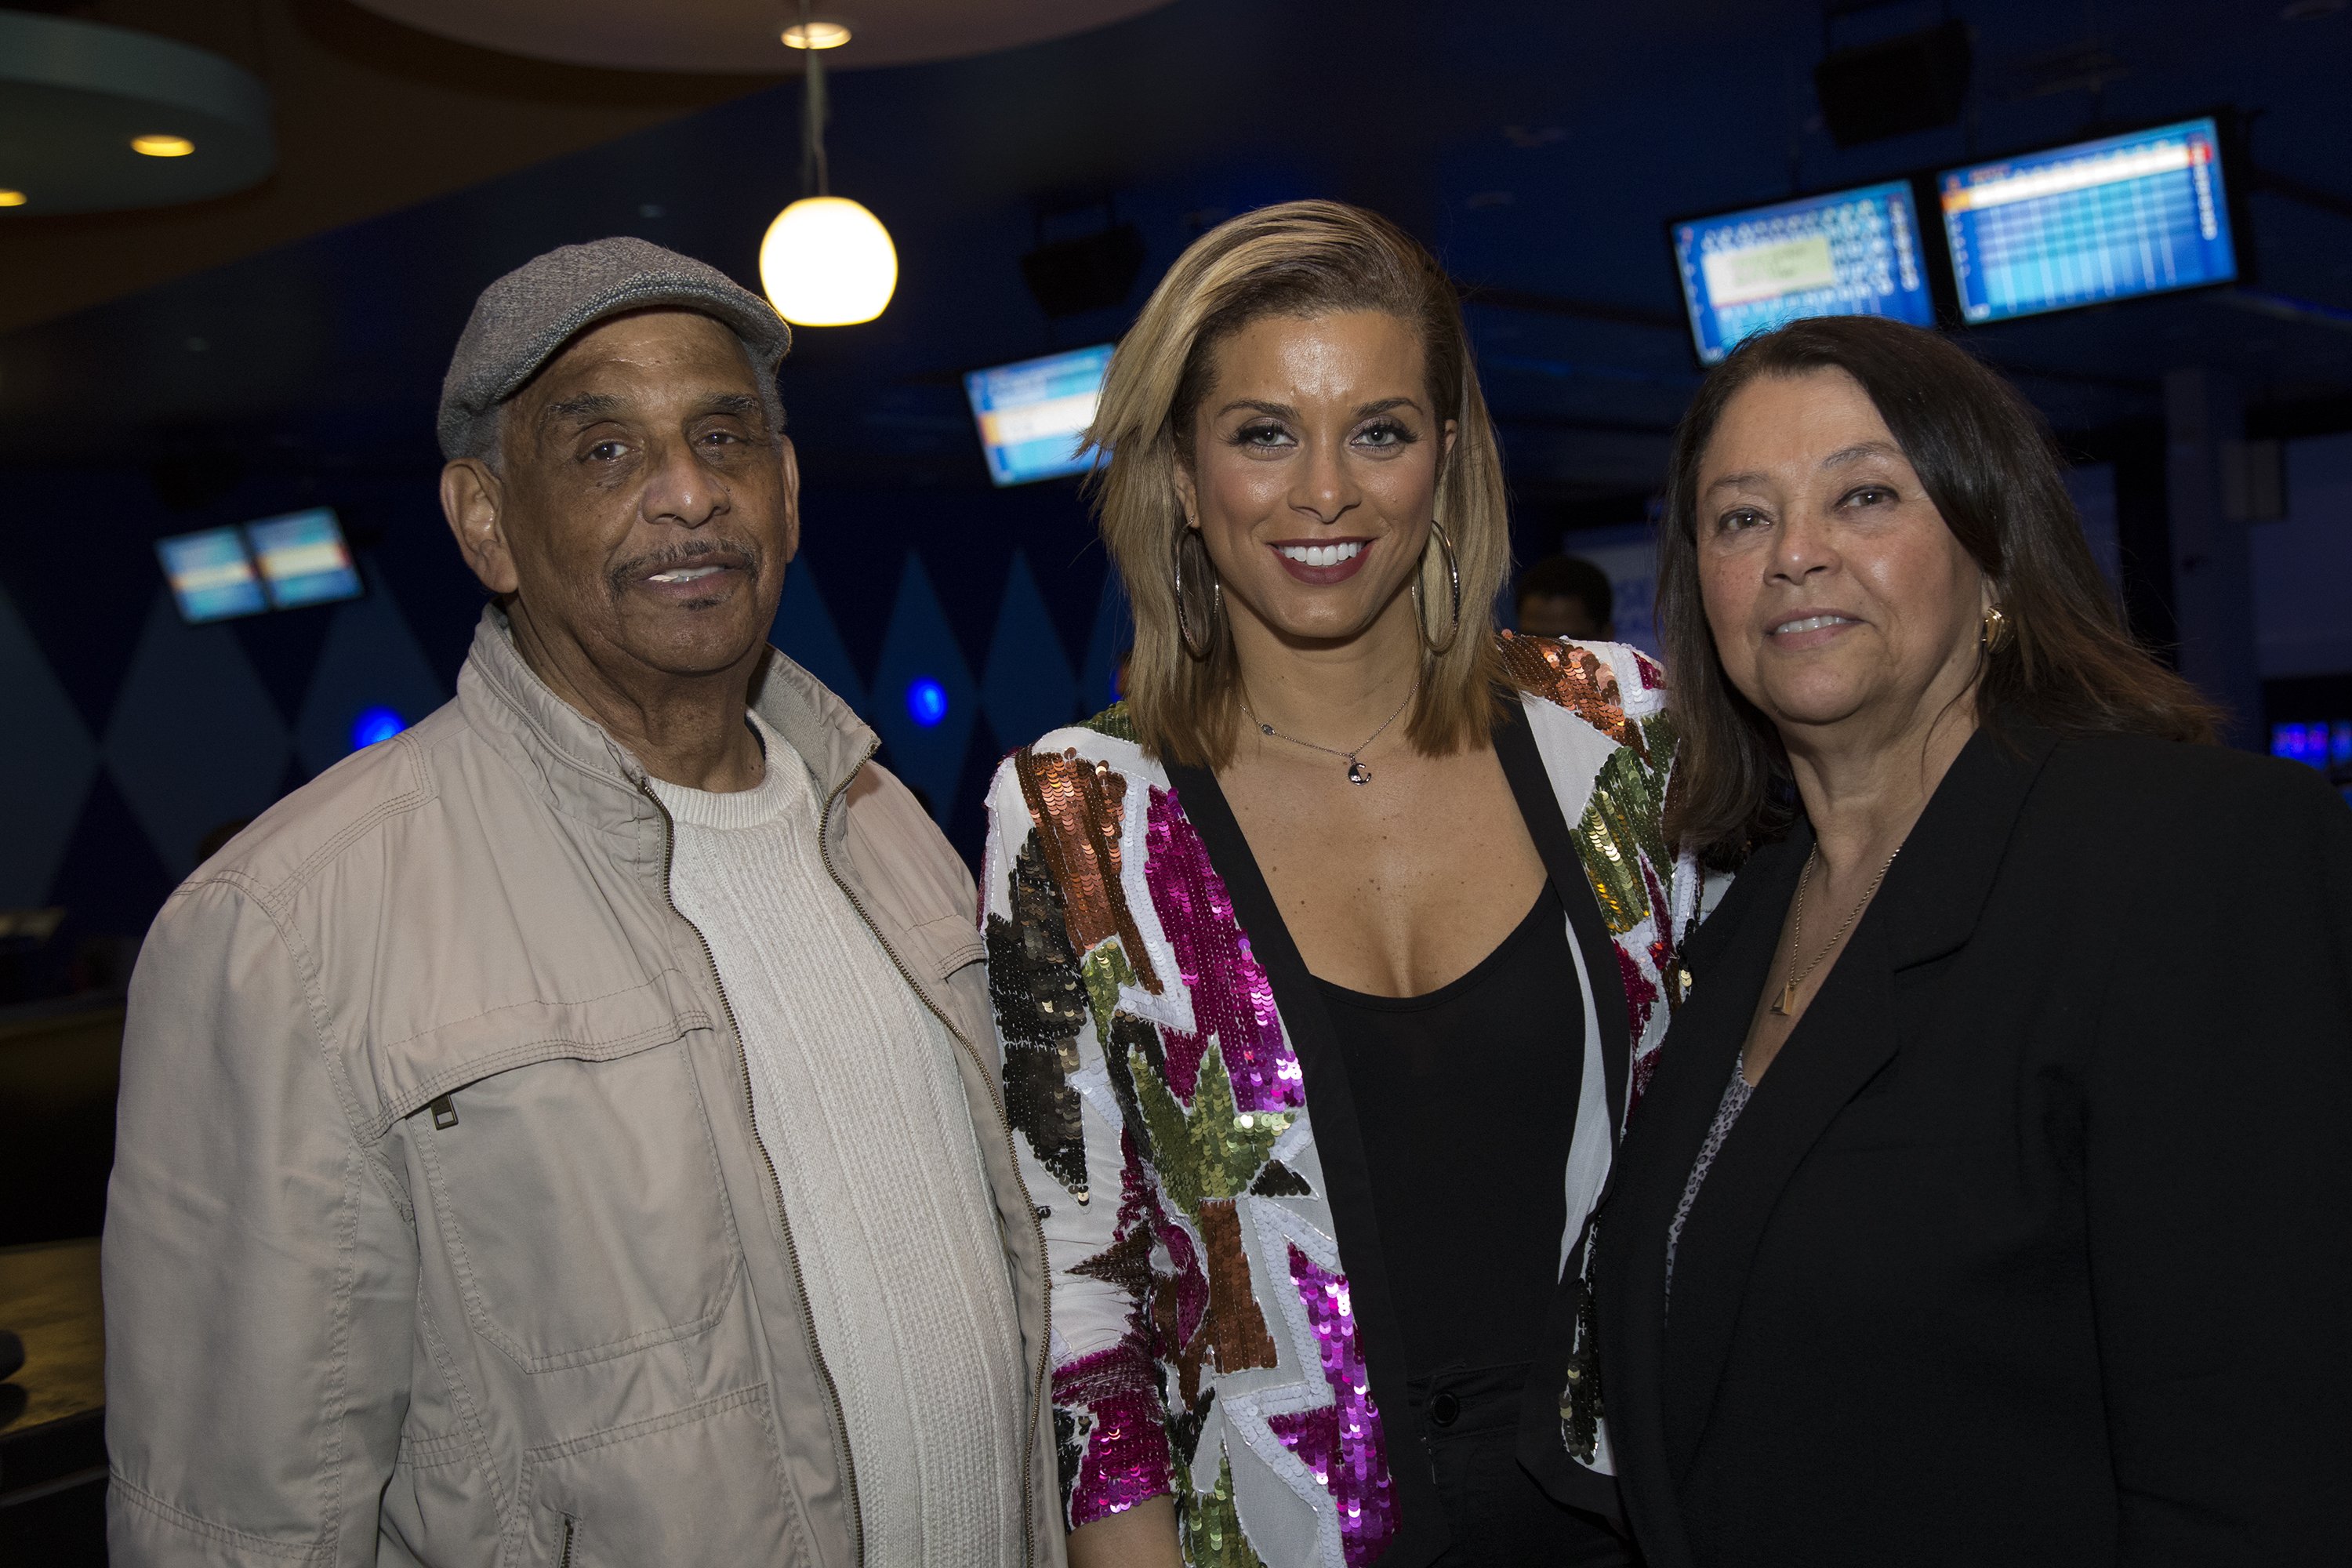 Robyn Dixon, Guy Bragg, and Gladys Bragg at  "Bowl For Kids' Sake" at Dave & Busters in Hanover, Maryland, on March 31, 2017. | Source: Getty Images 